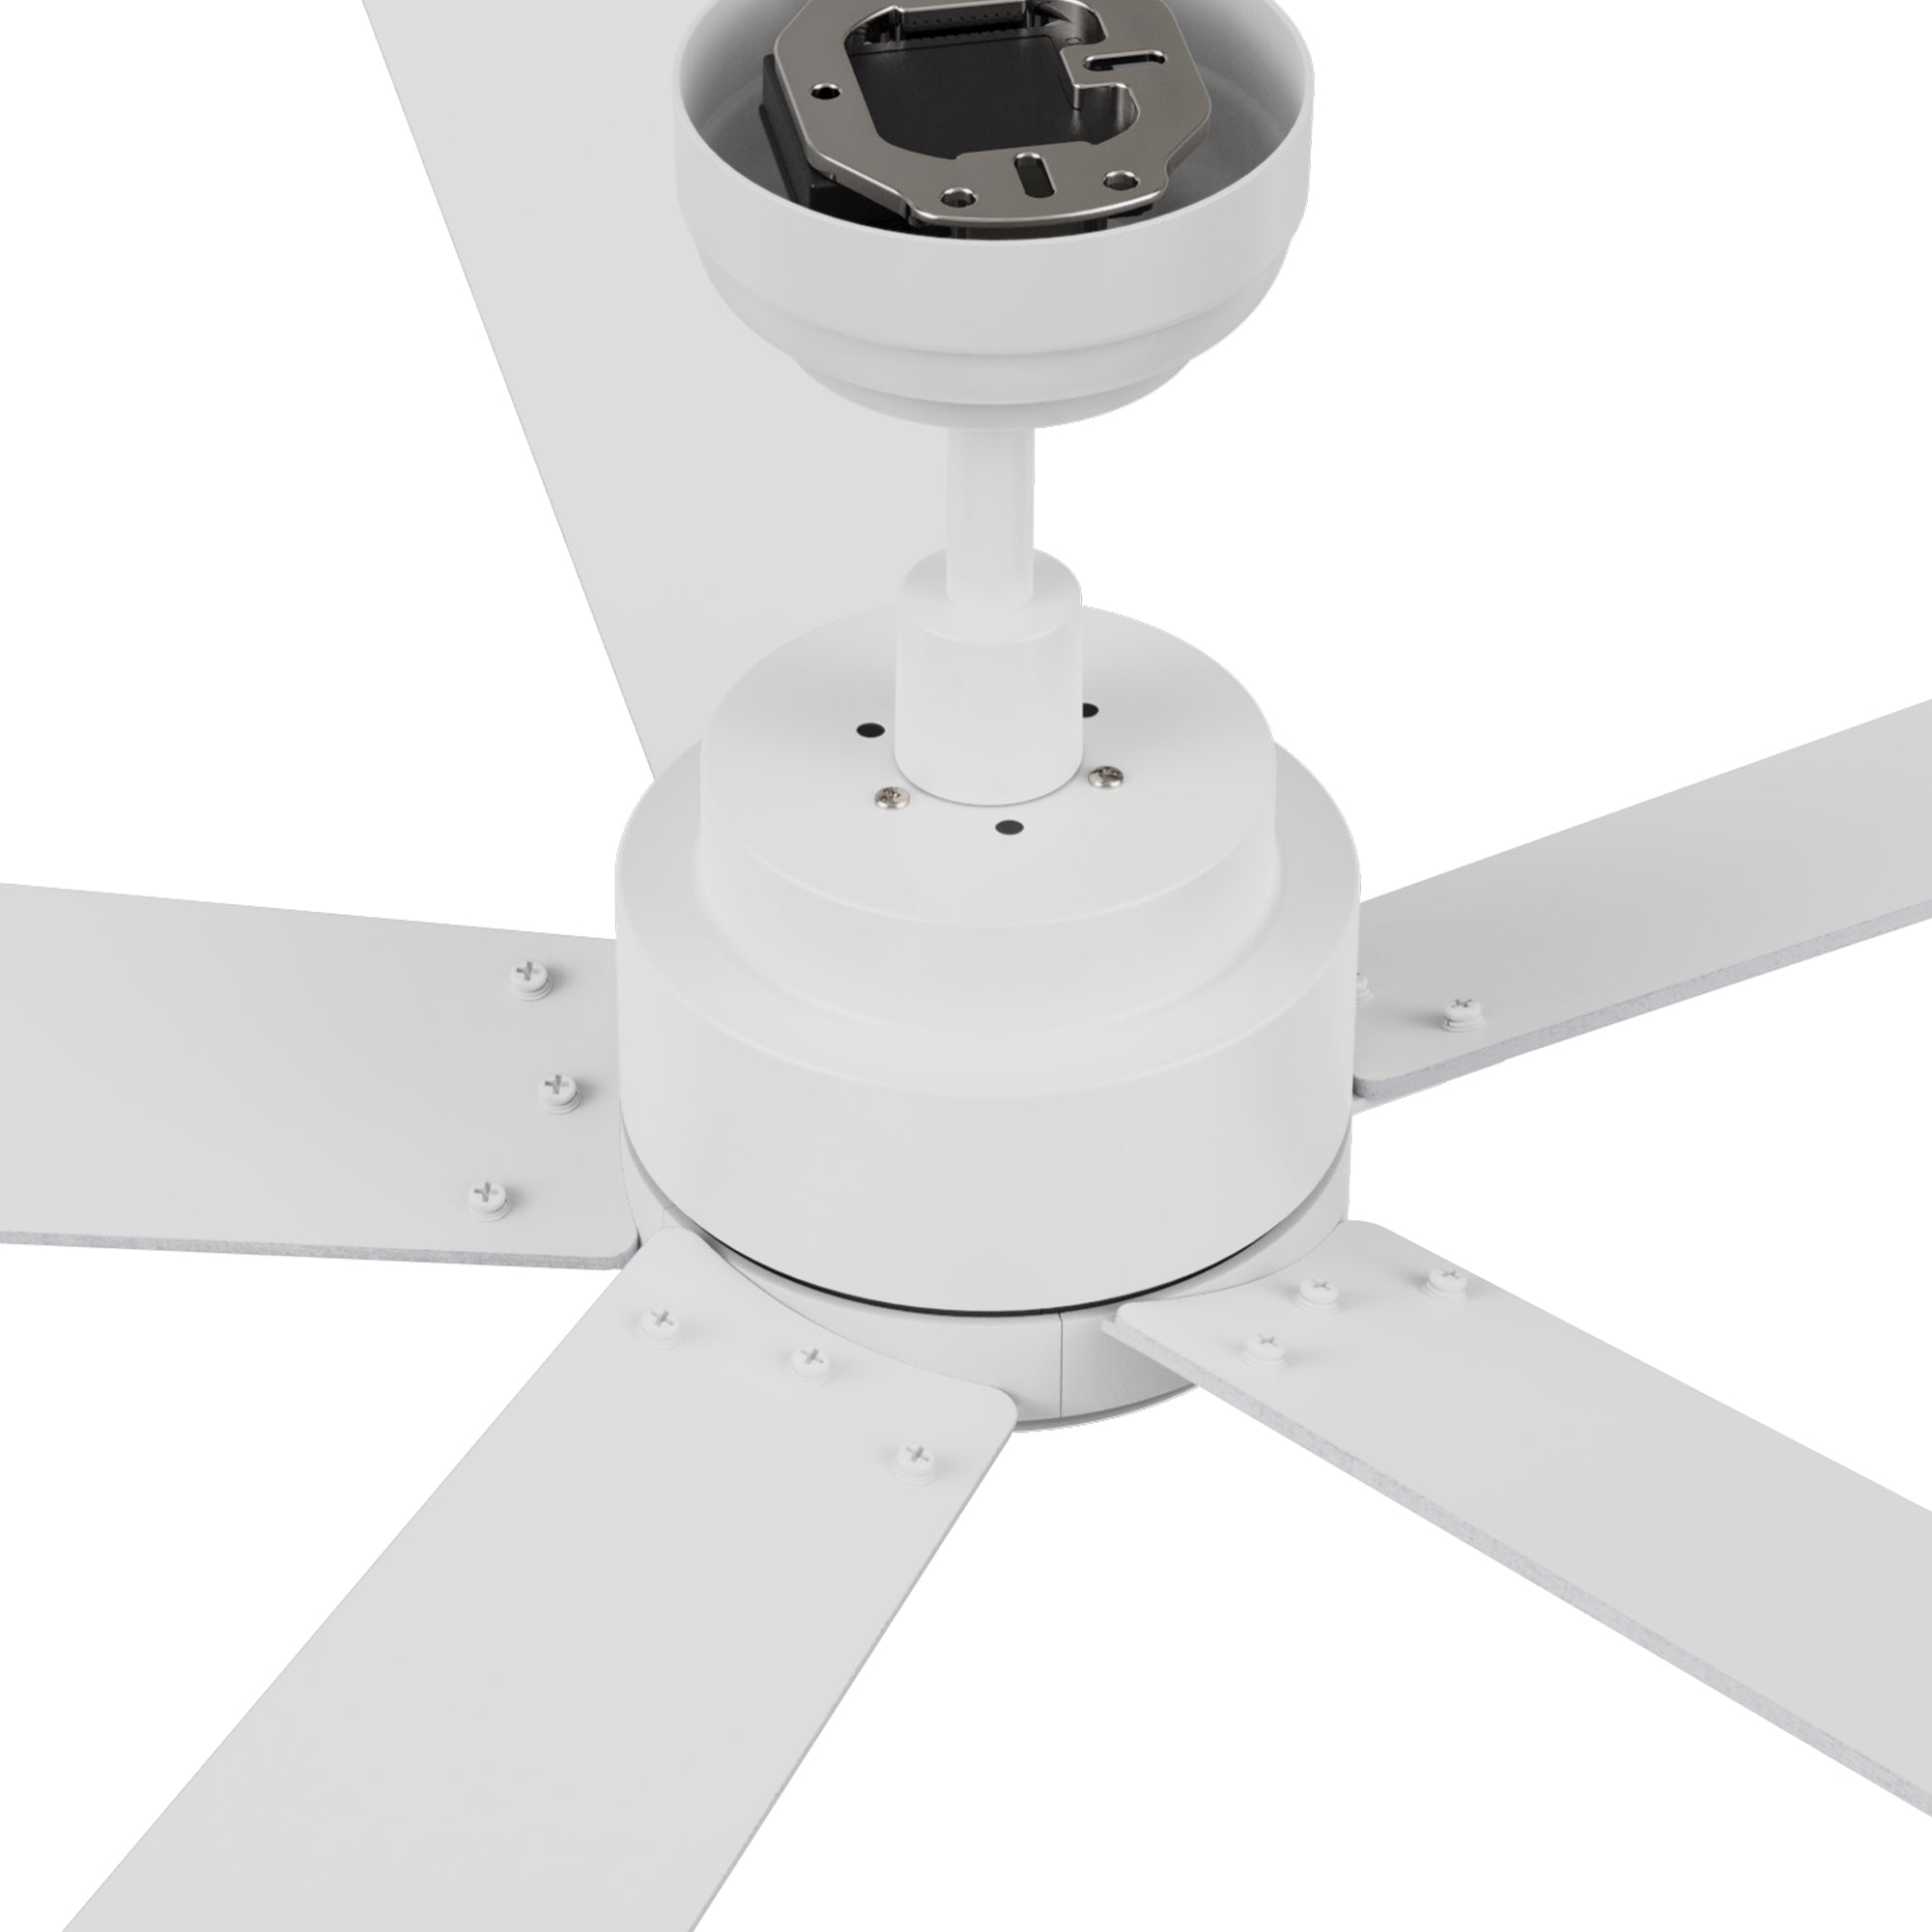 Carro Welland 60 inch remote control ceiling fans boasts a simple design with a White finish and elegant Plywood blades, Fans are made with incredibly efficient and completely silent DC motors. 